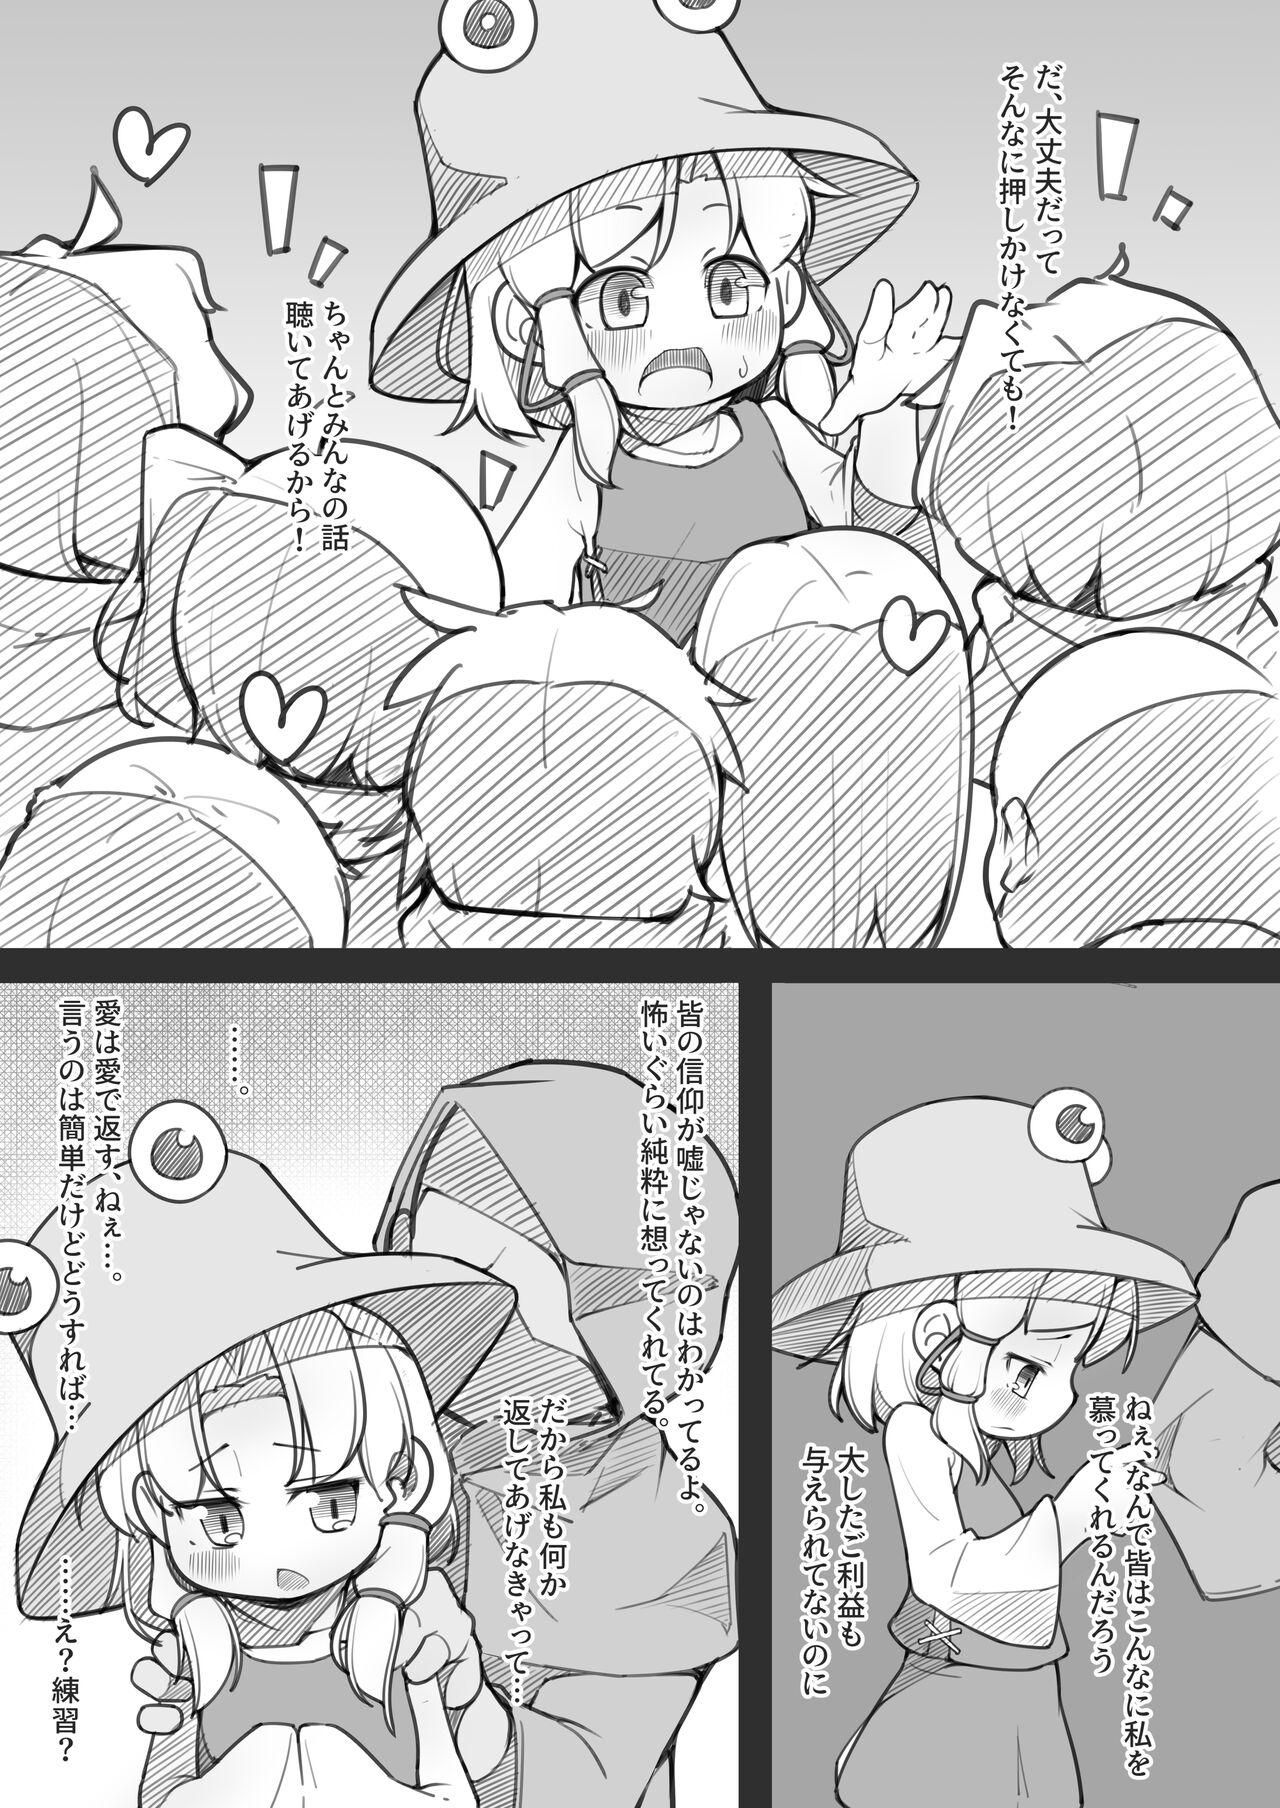 Sloppy Blowjob 幻想入りしたカリスマ教祖に諏訪子さまが祀り上げられる話 - Touhou project Off - Page 6